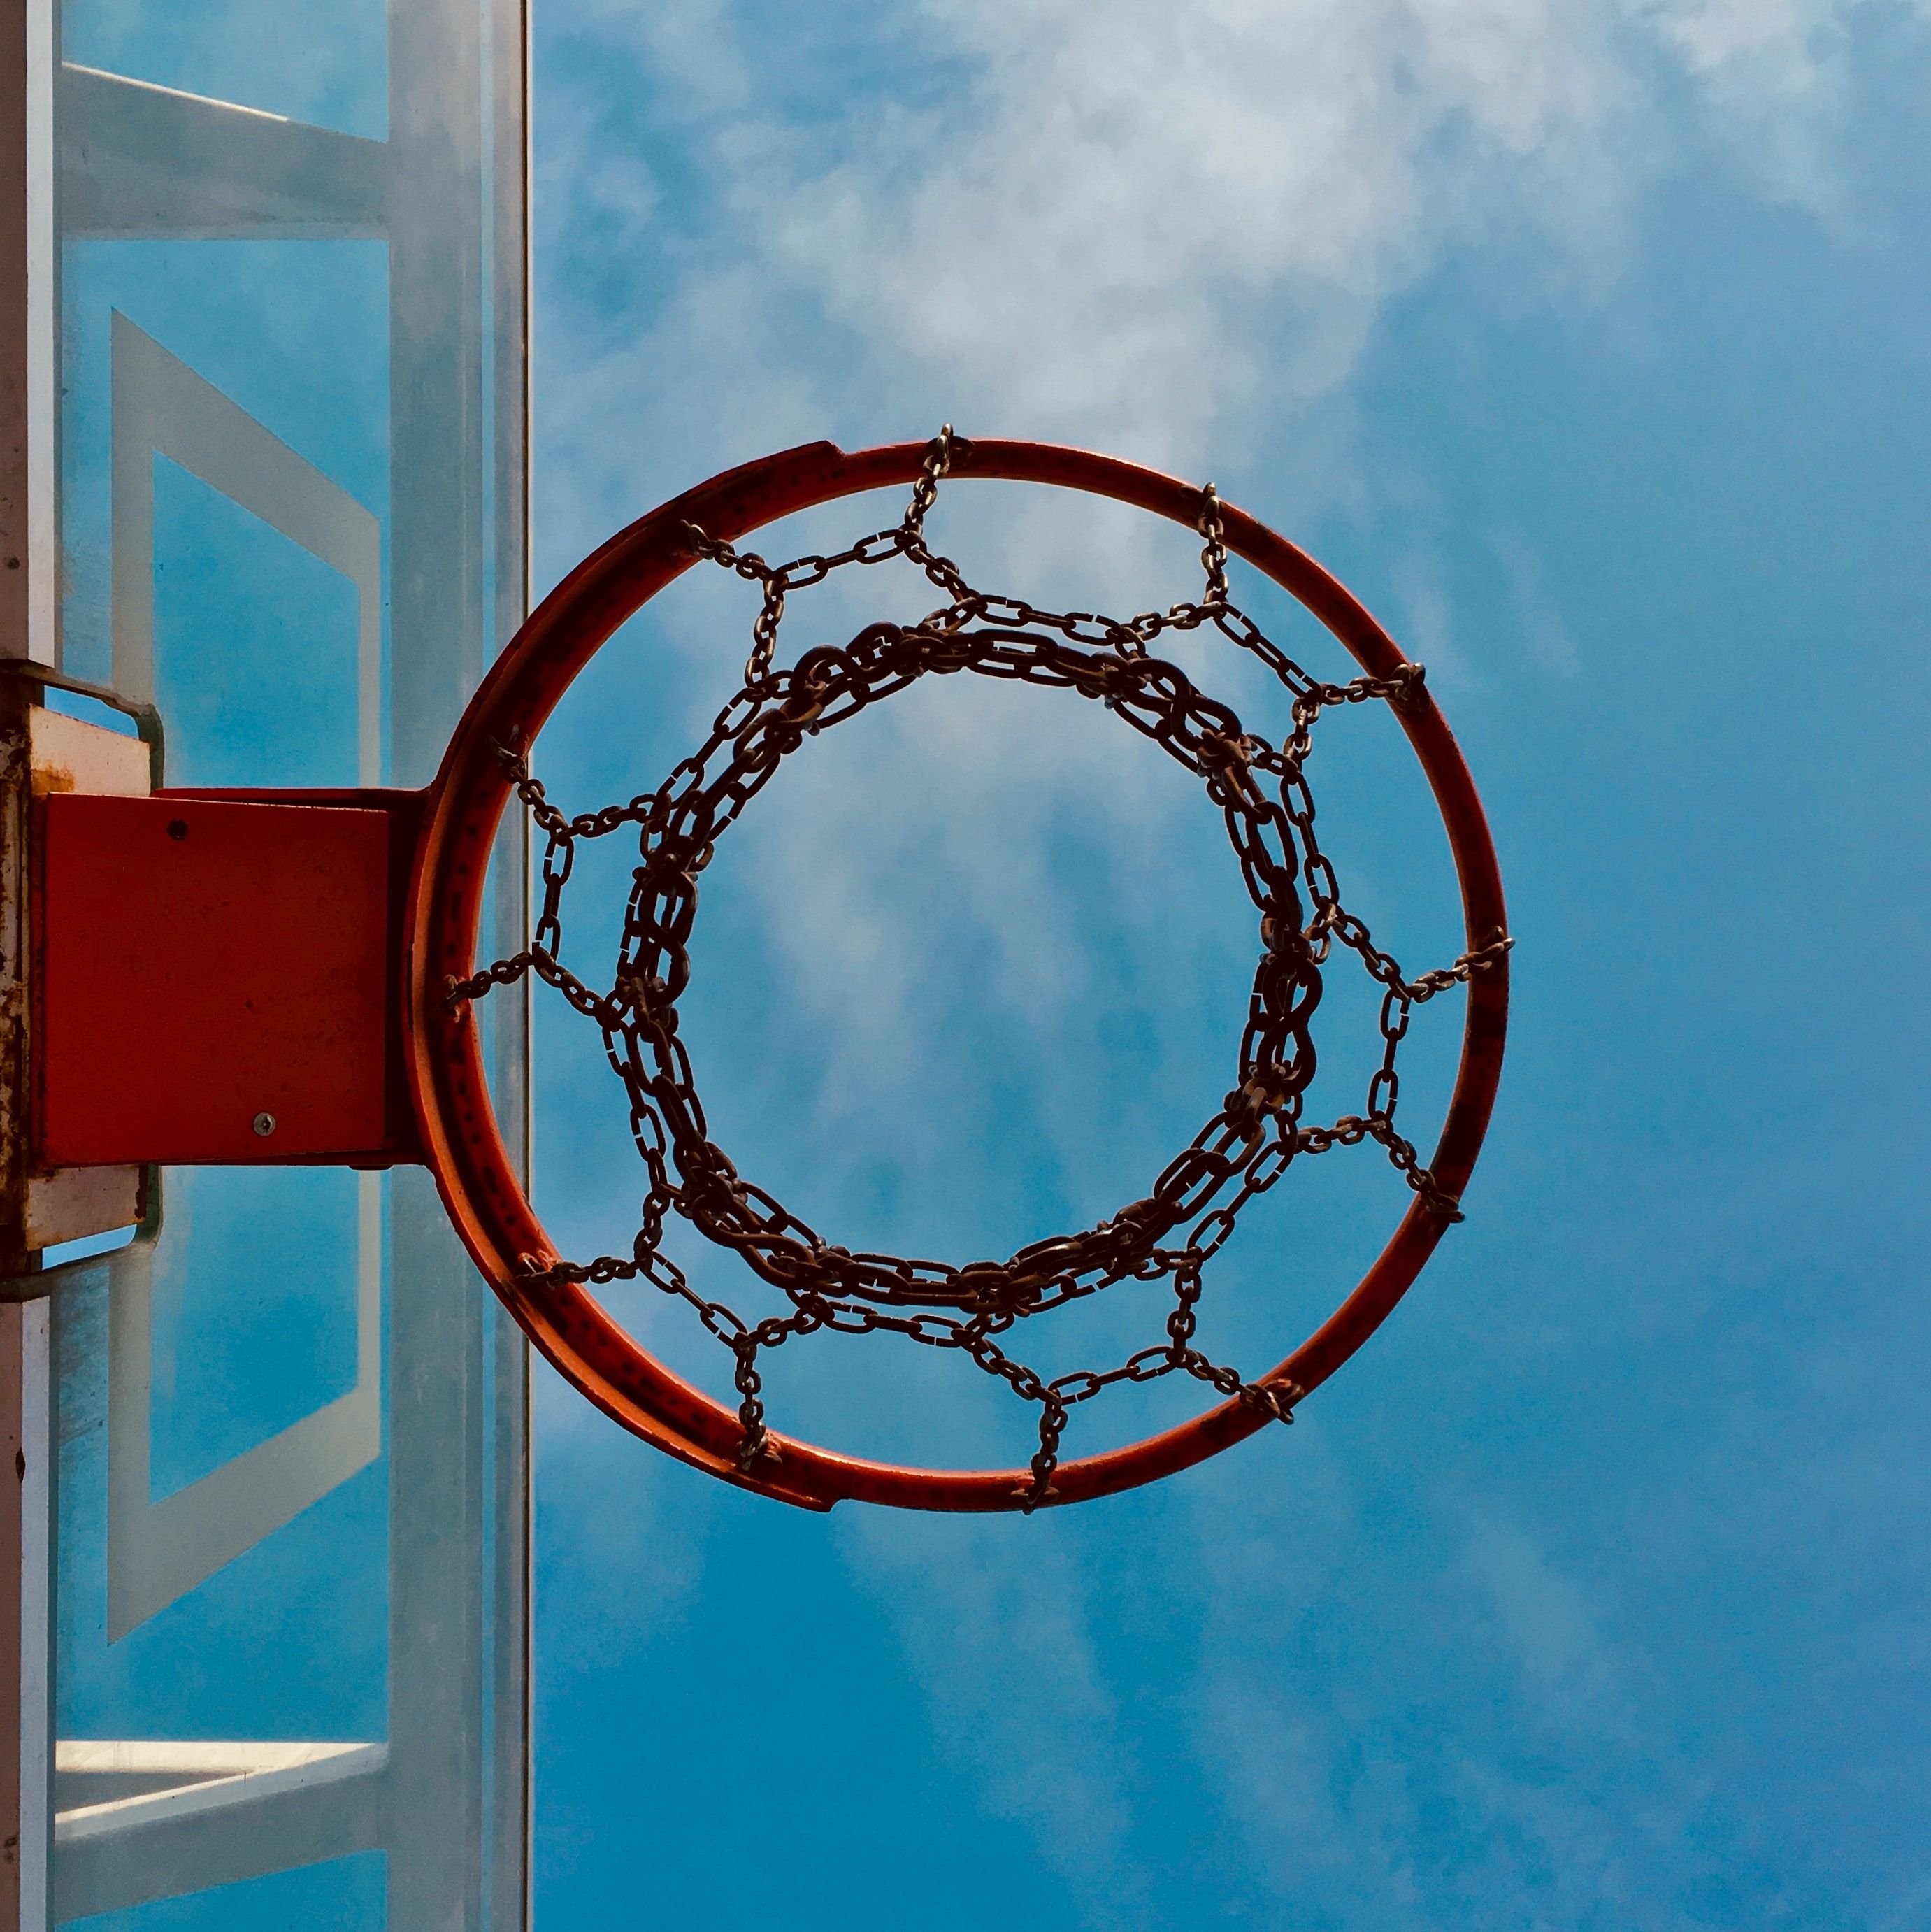 Streetball Picture. Download Free Image